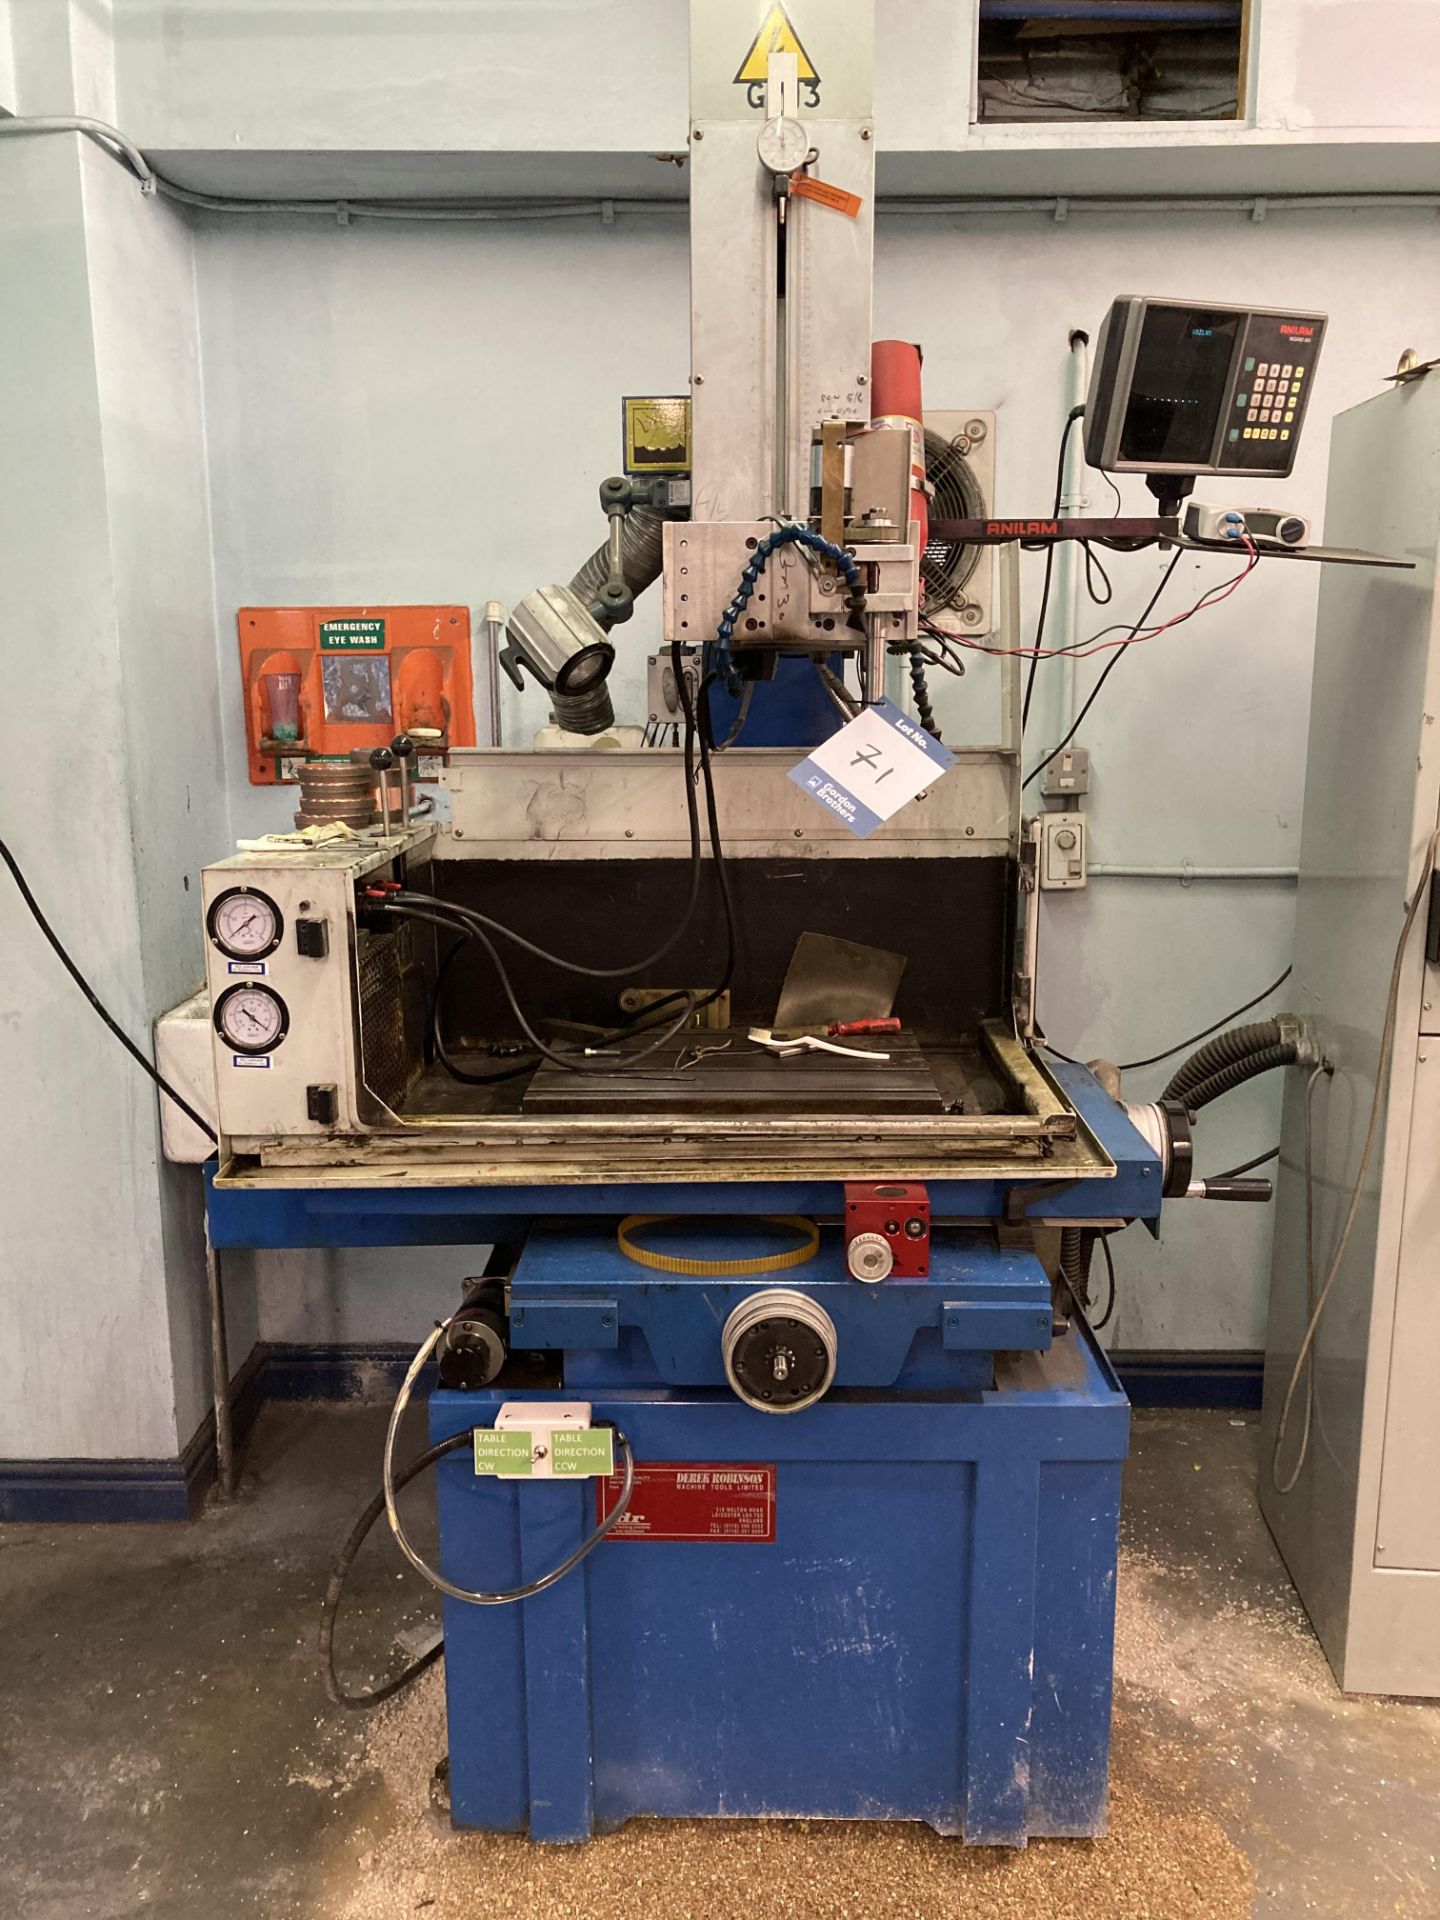 Chmer CM 323-R electrical discharge machine, Serial No. M001009 (2000), table size 500mm x 350mm